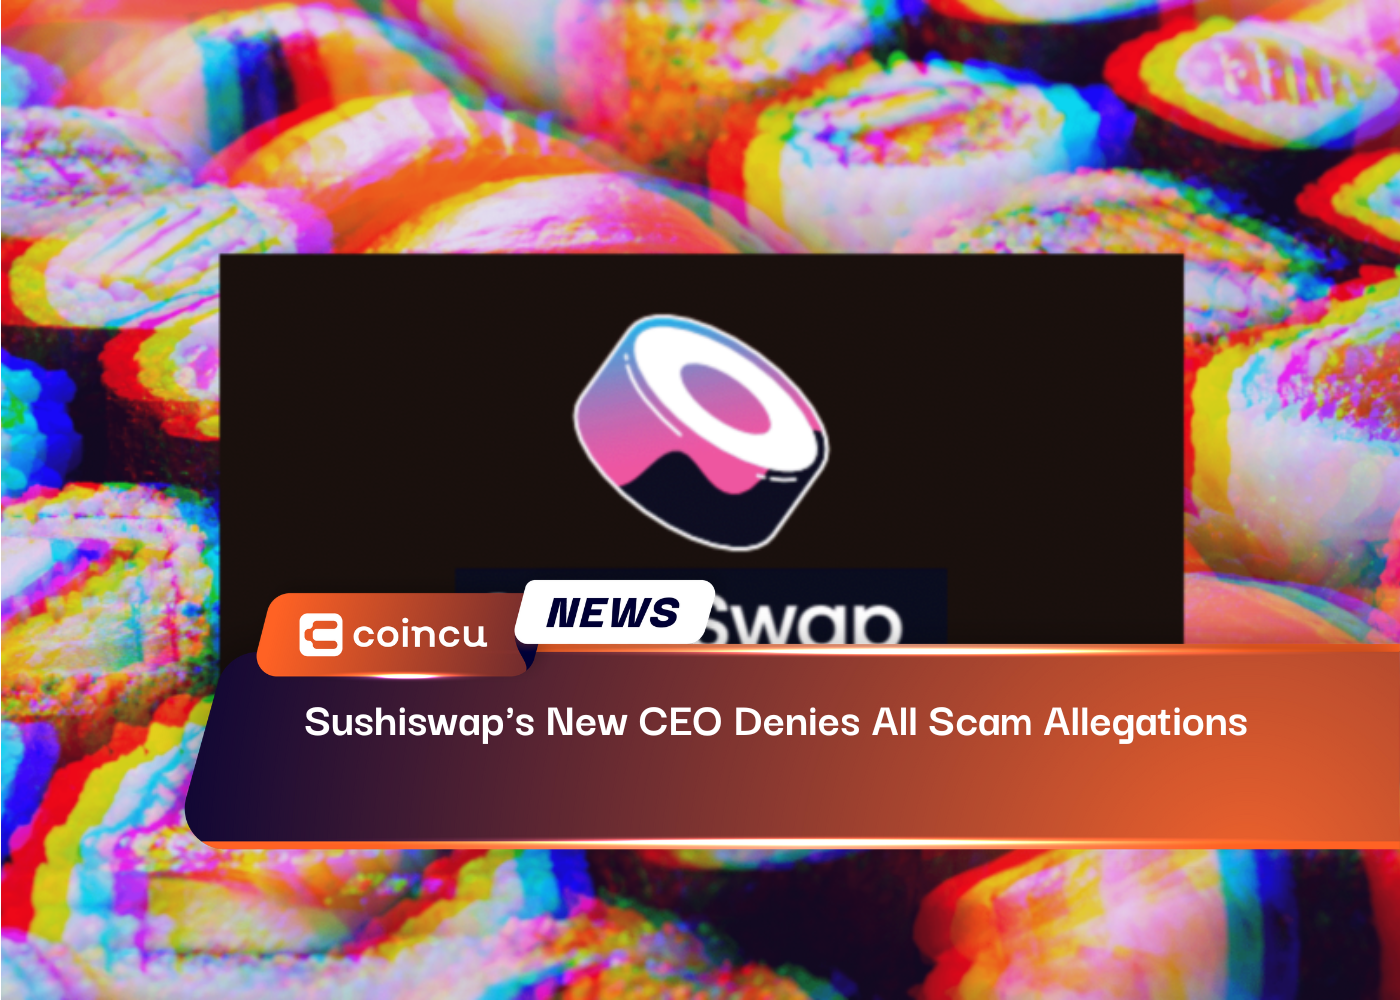 Sushiswap's New CEO Denies All Scam Allegations